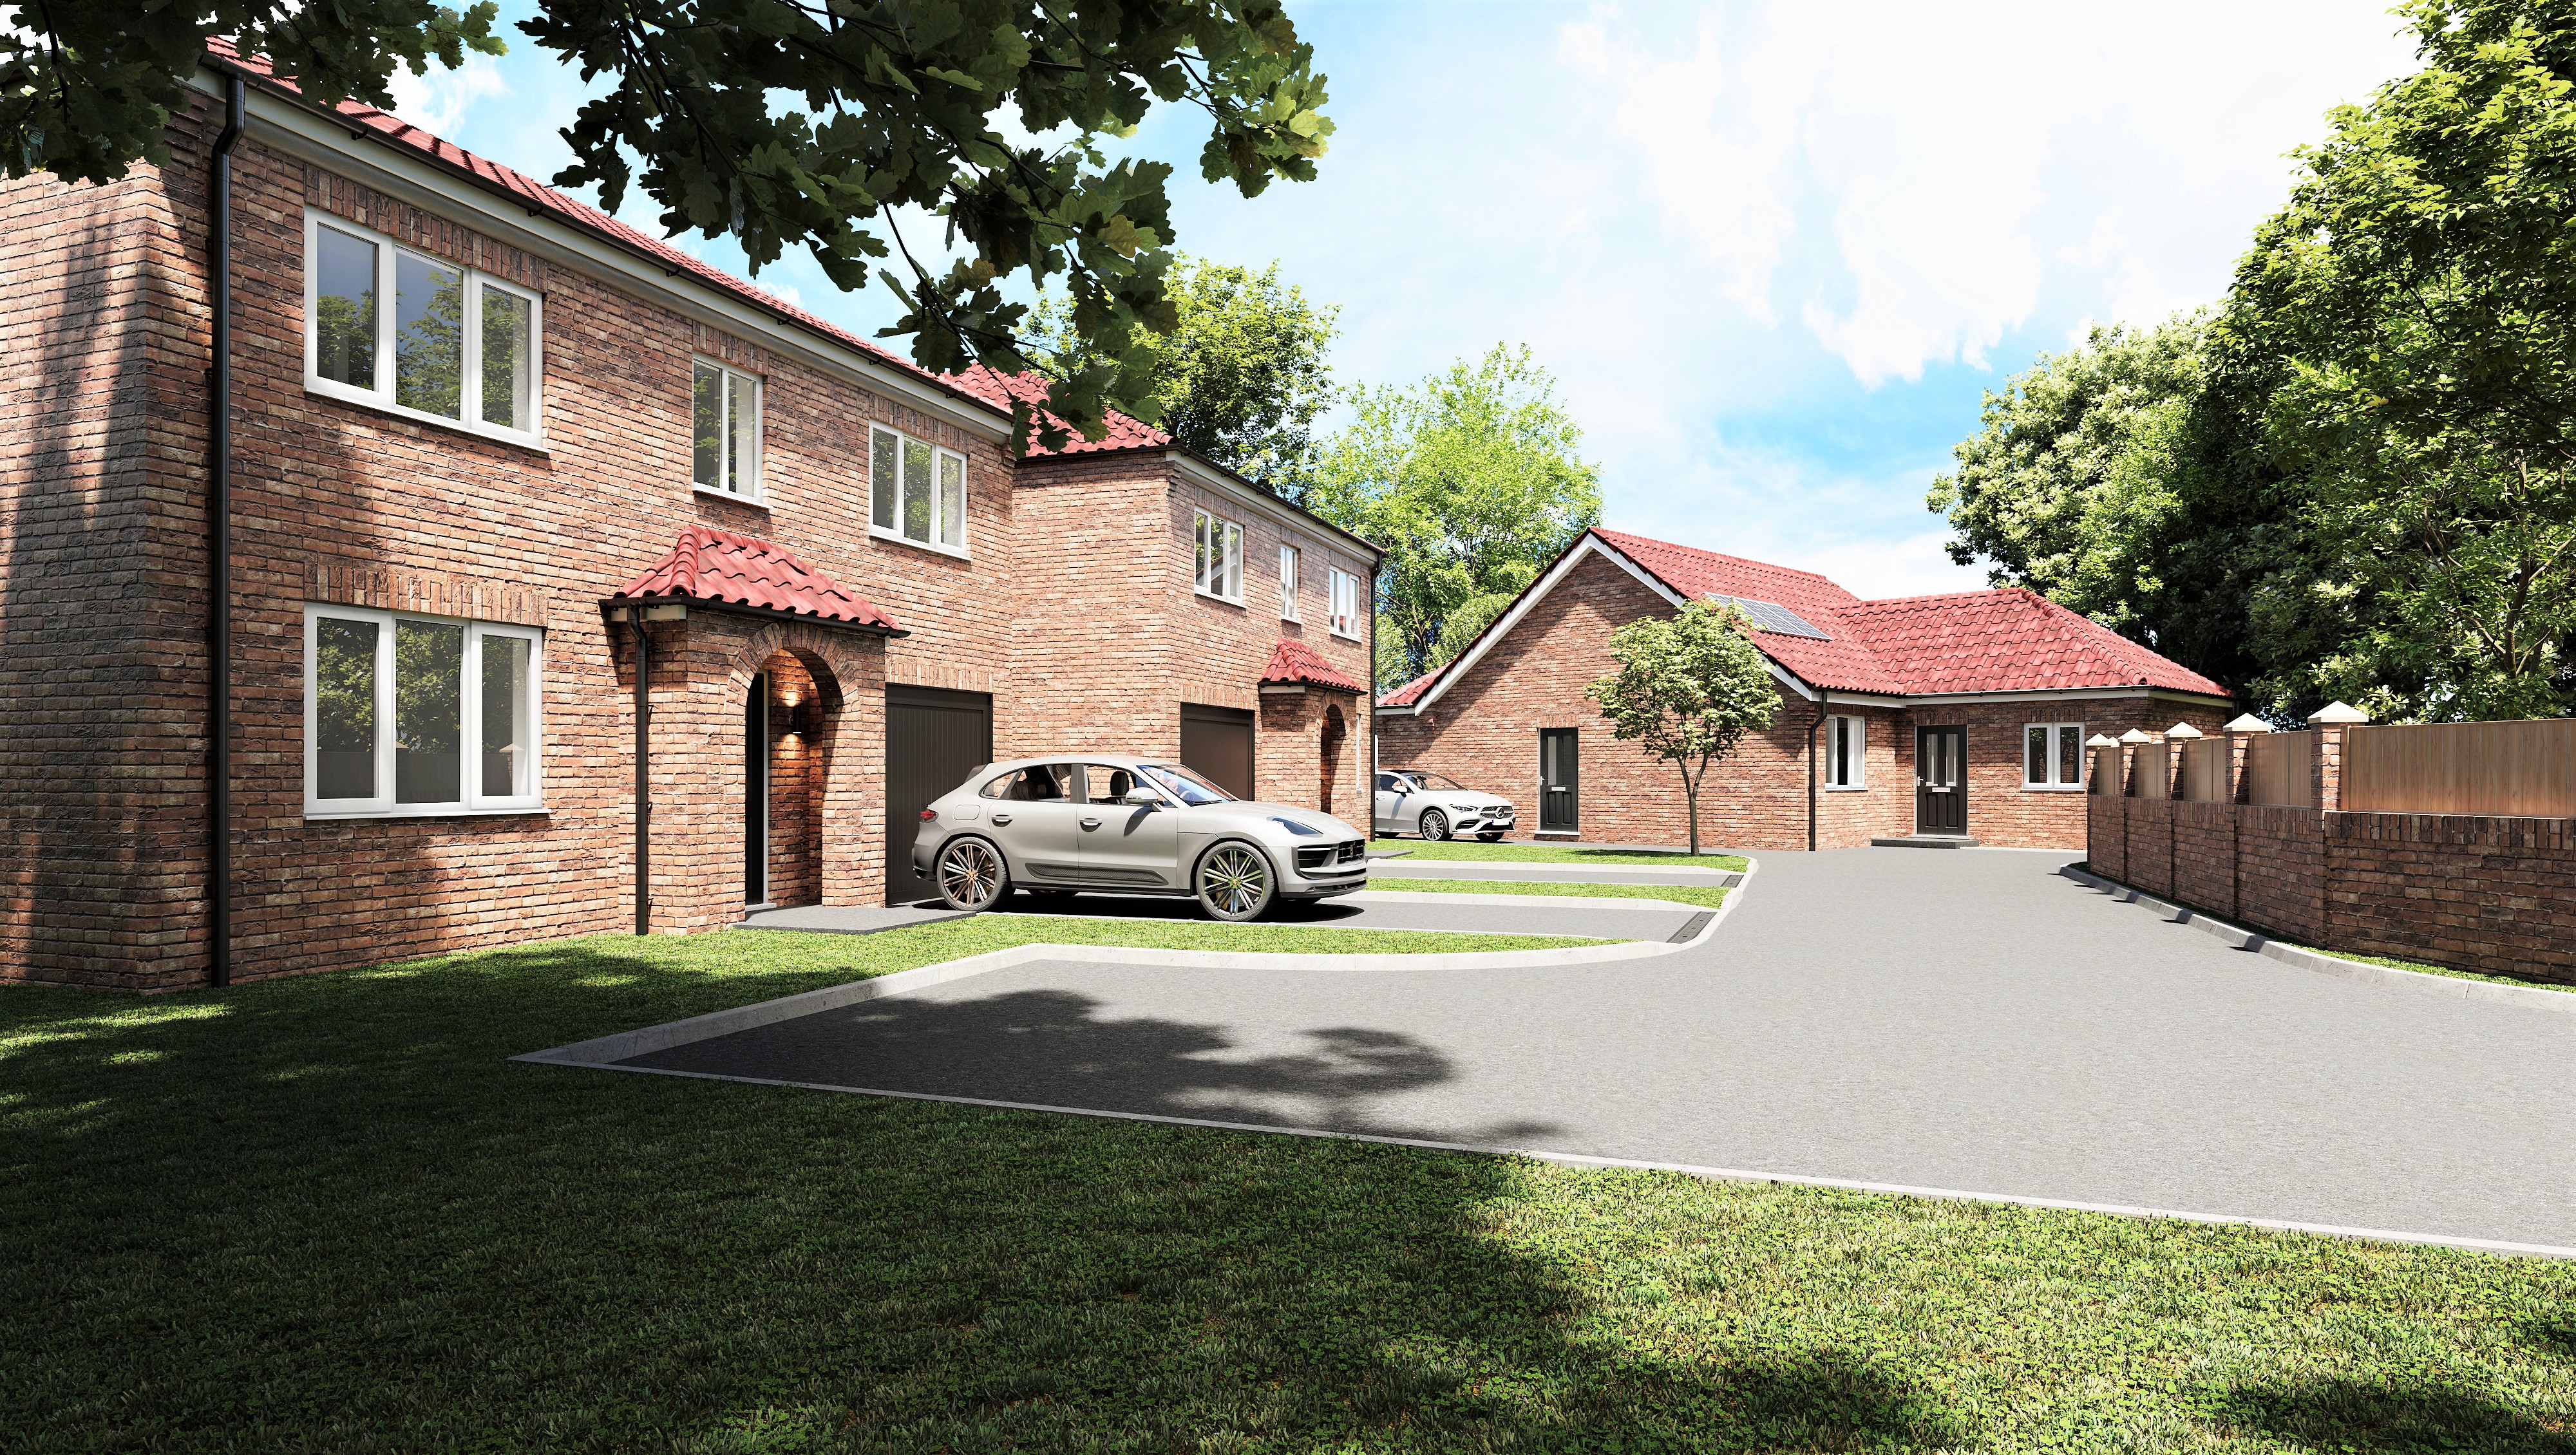 HILL CREST, DONCASTER CGI- High res